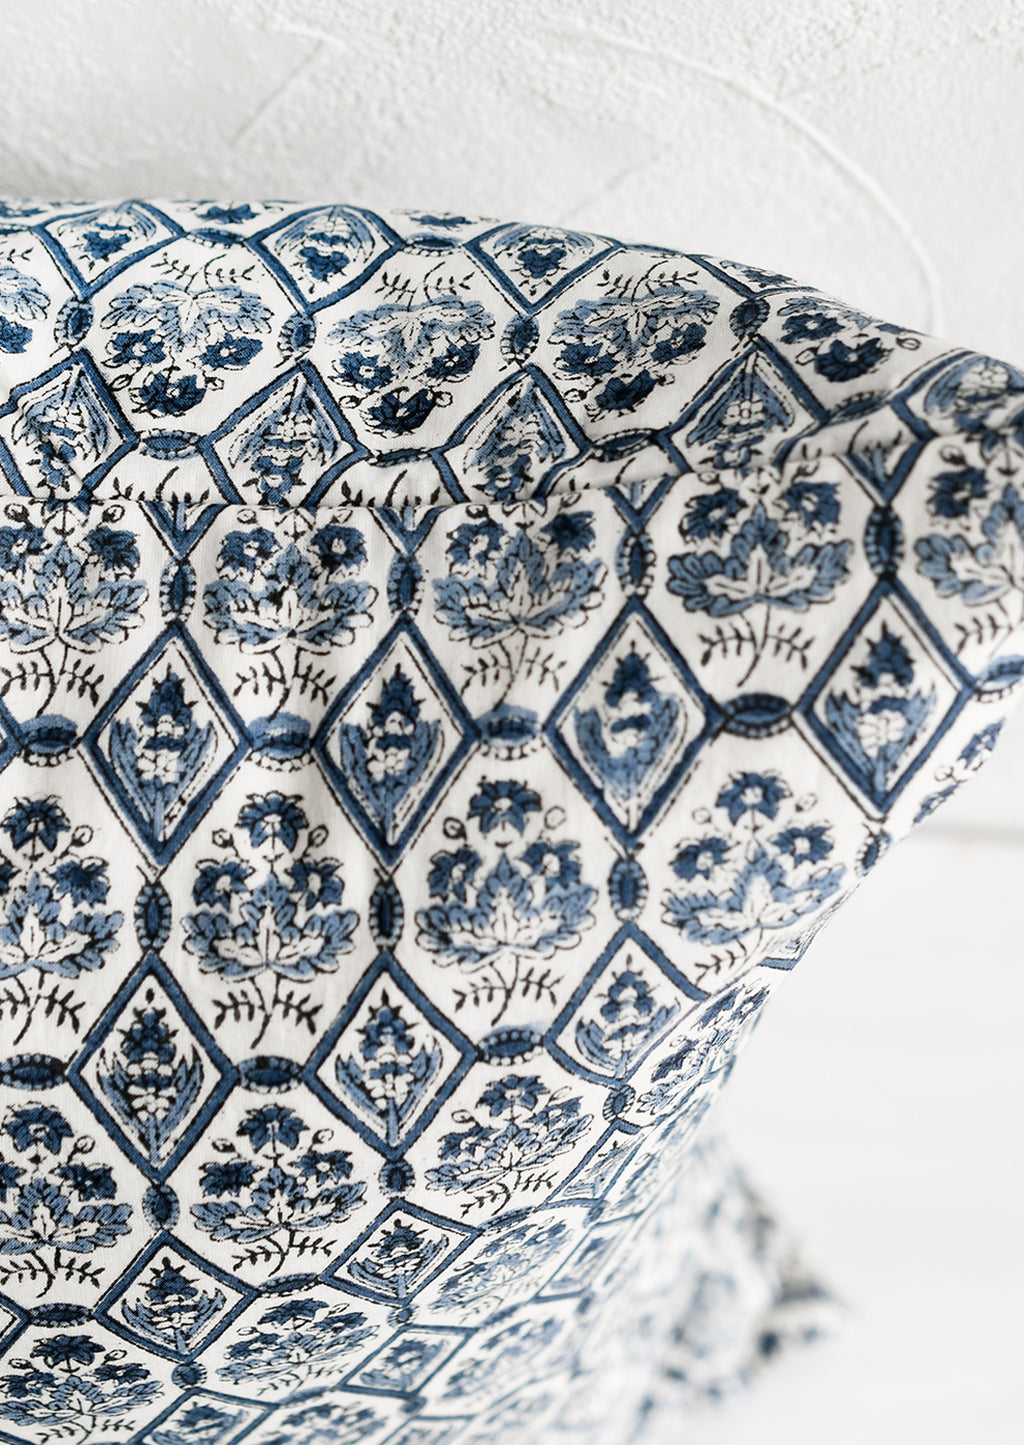 3: A block printed pillow in blue and white tile print.